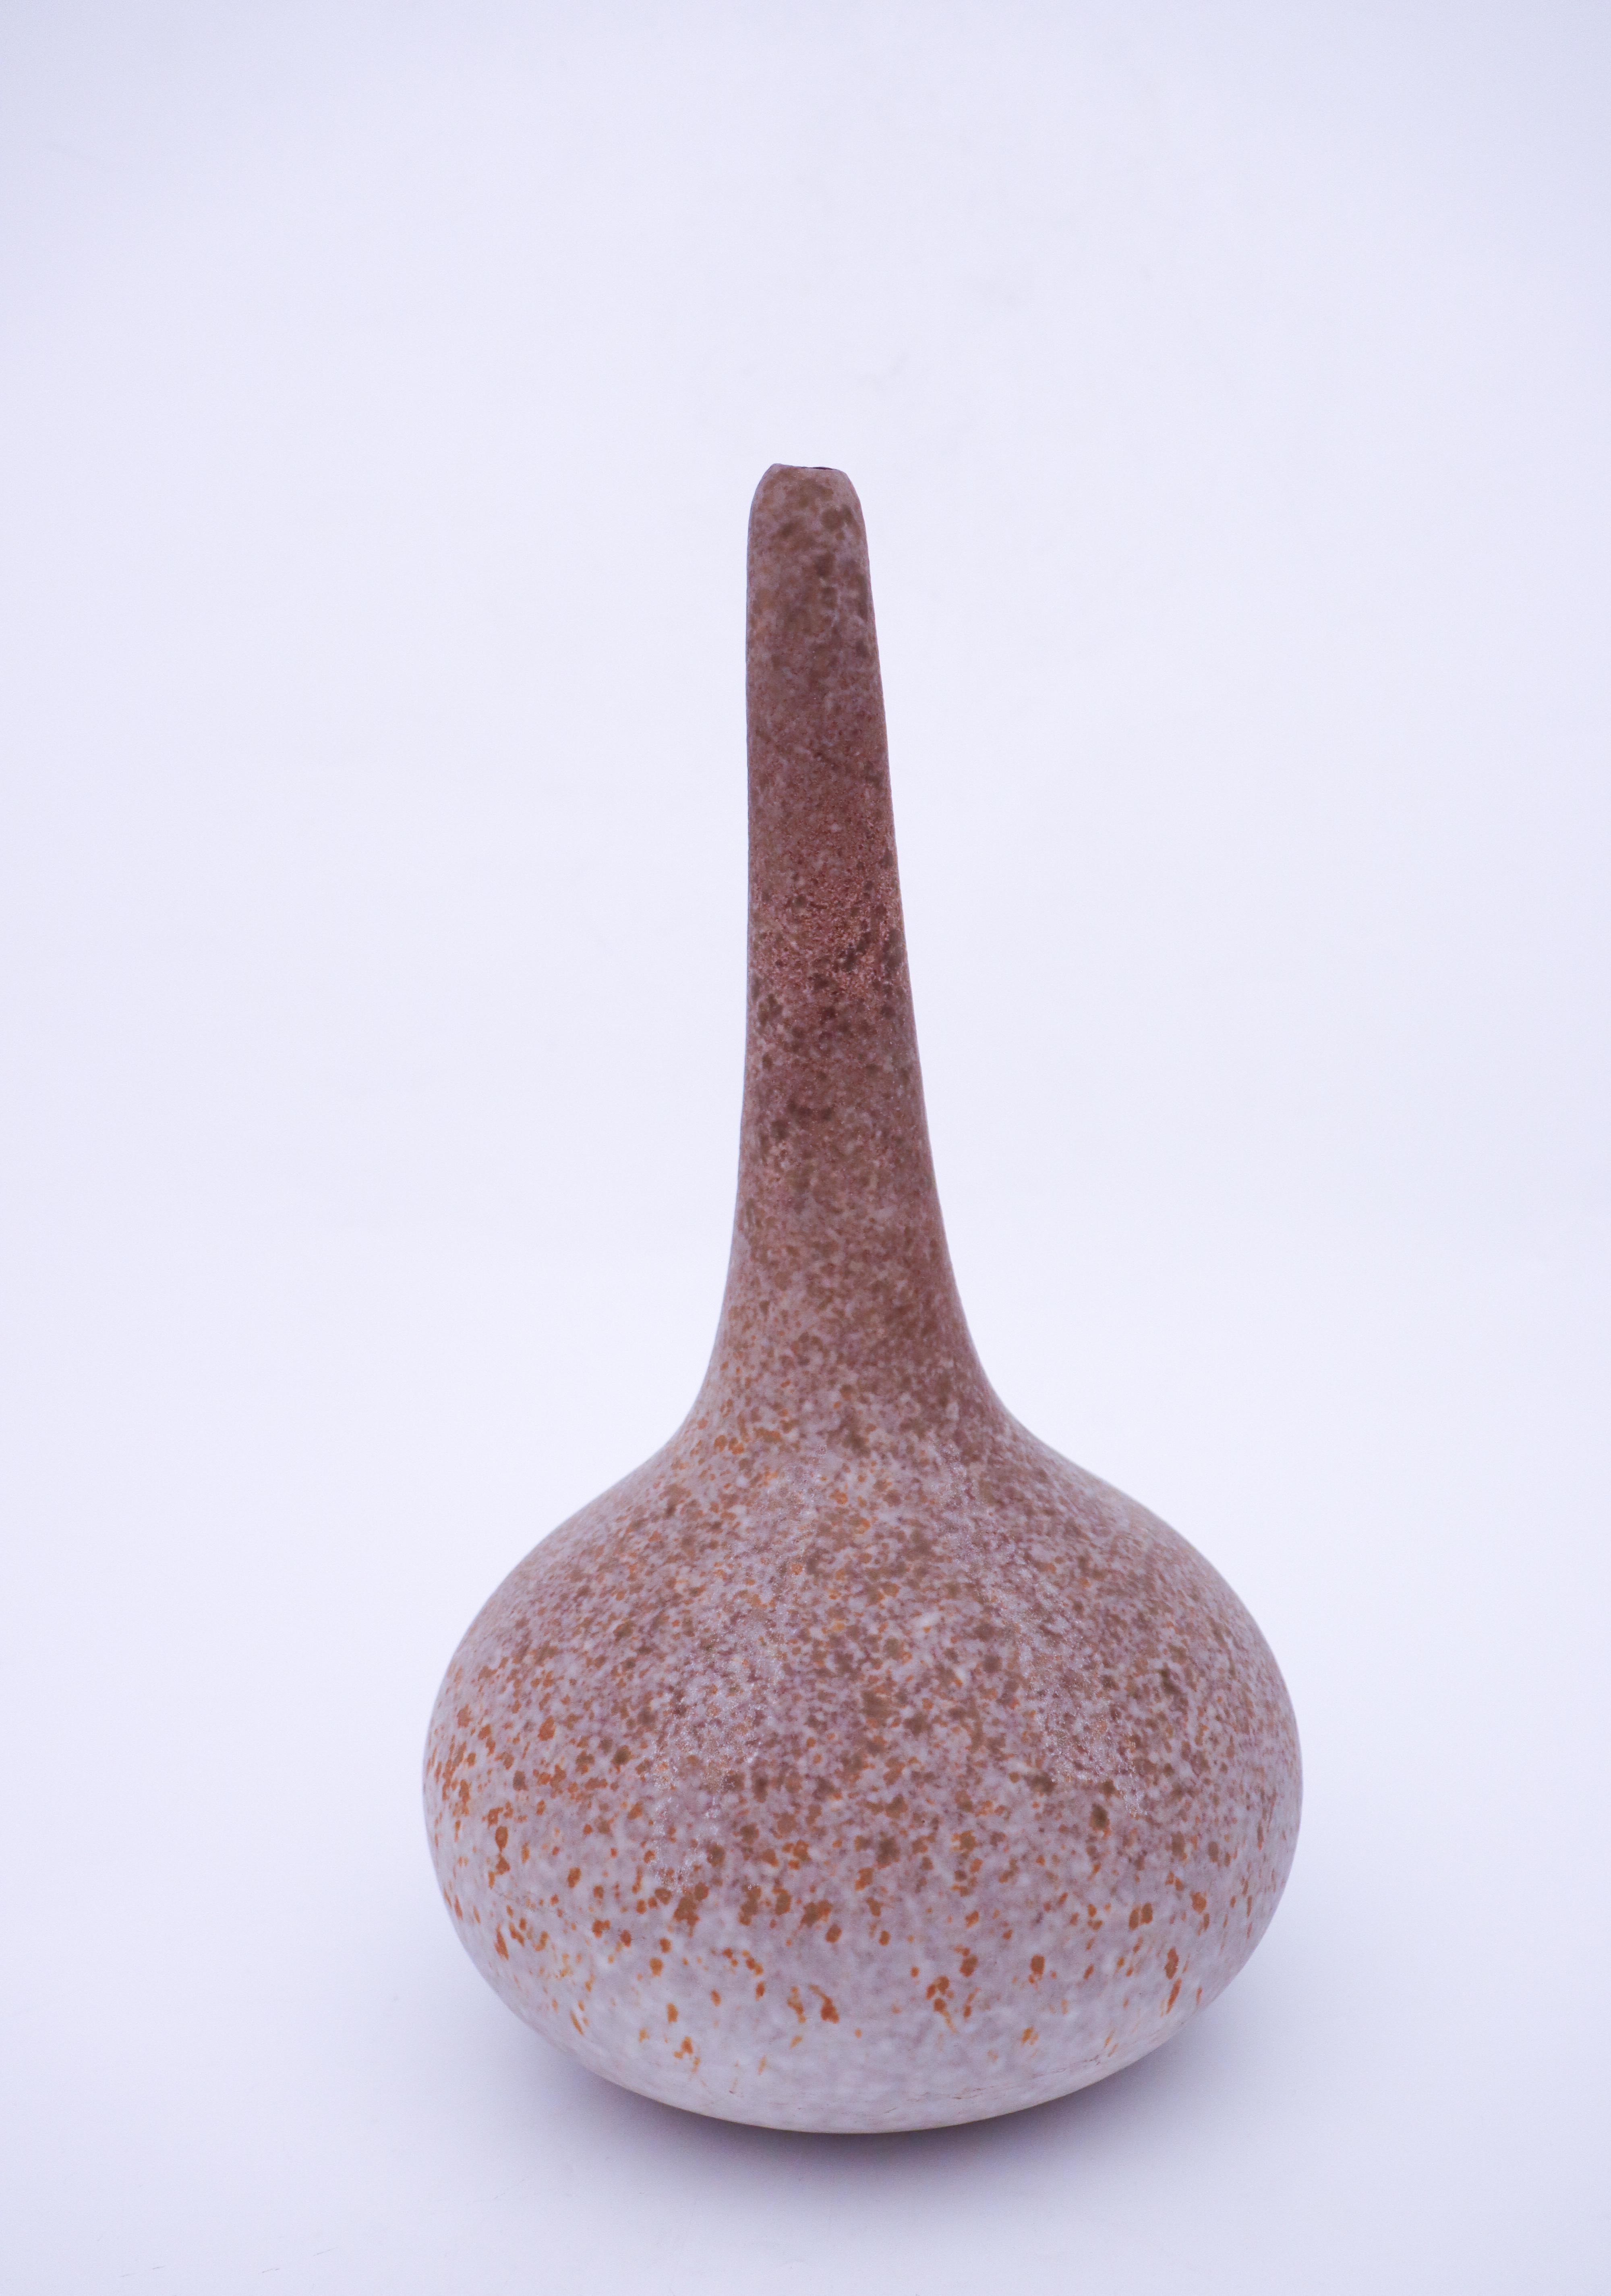 A beautiful stoneware vase designed by Paul Hoff at Gustavsberg. It is more of a sculpture than a vase but it has a small hole at the top. The vase is 37 cm (14,8